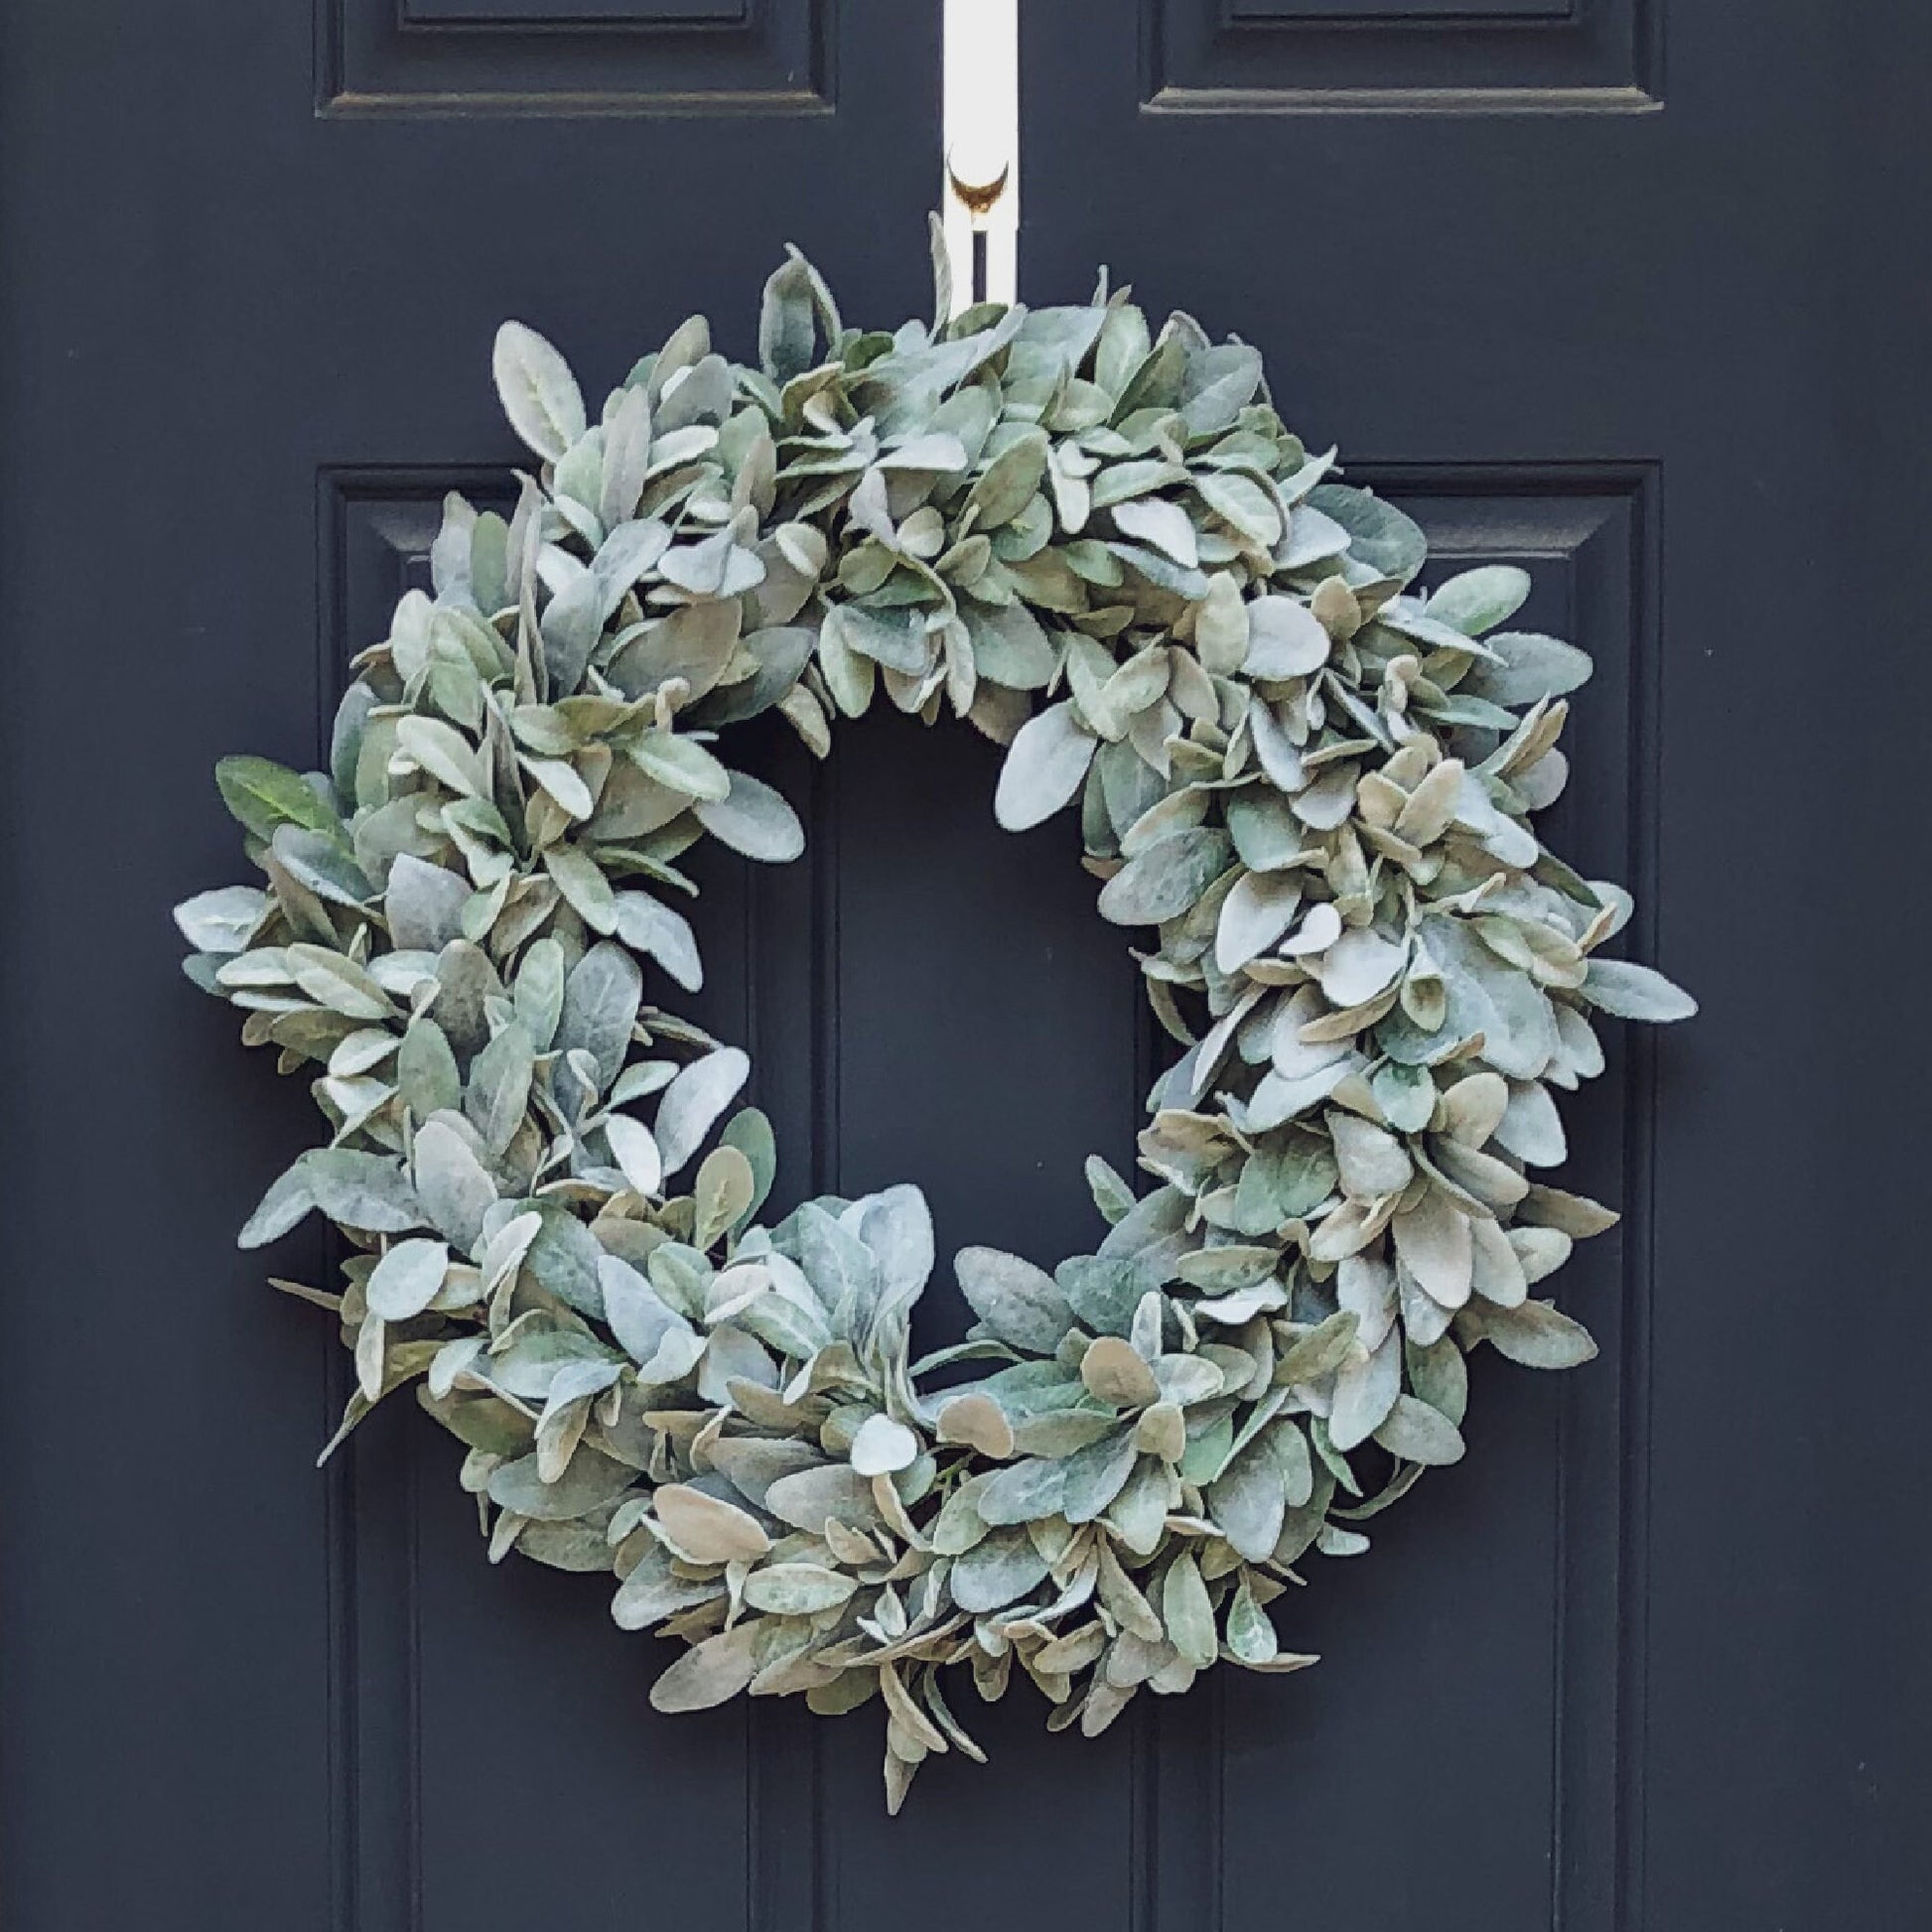 24" flocked lambs ear greenery wreath. Wreath is hanging from a gold wreath hanger on a dark blue front door.